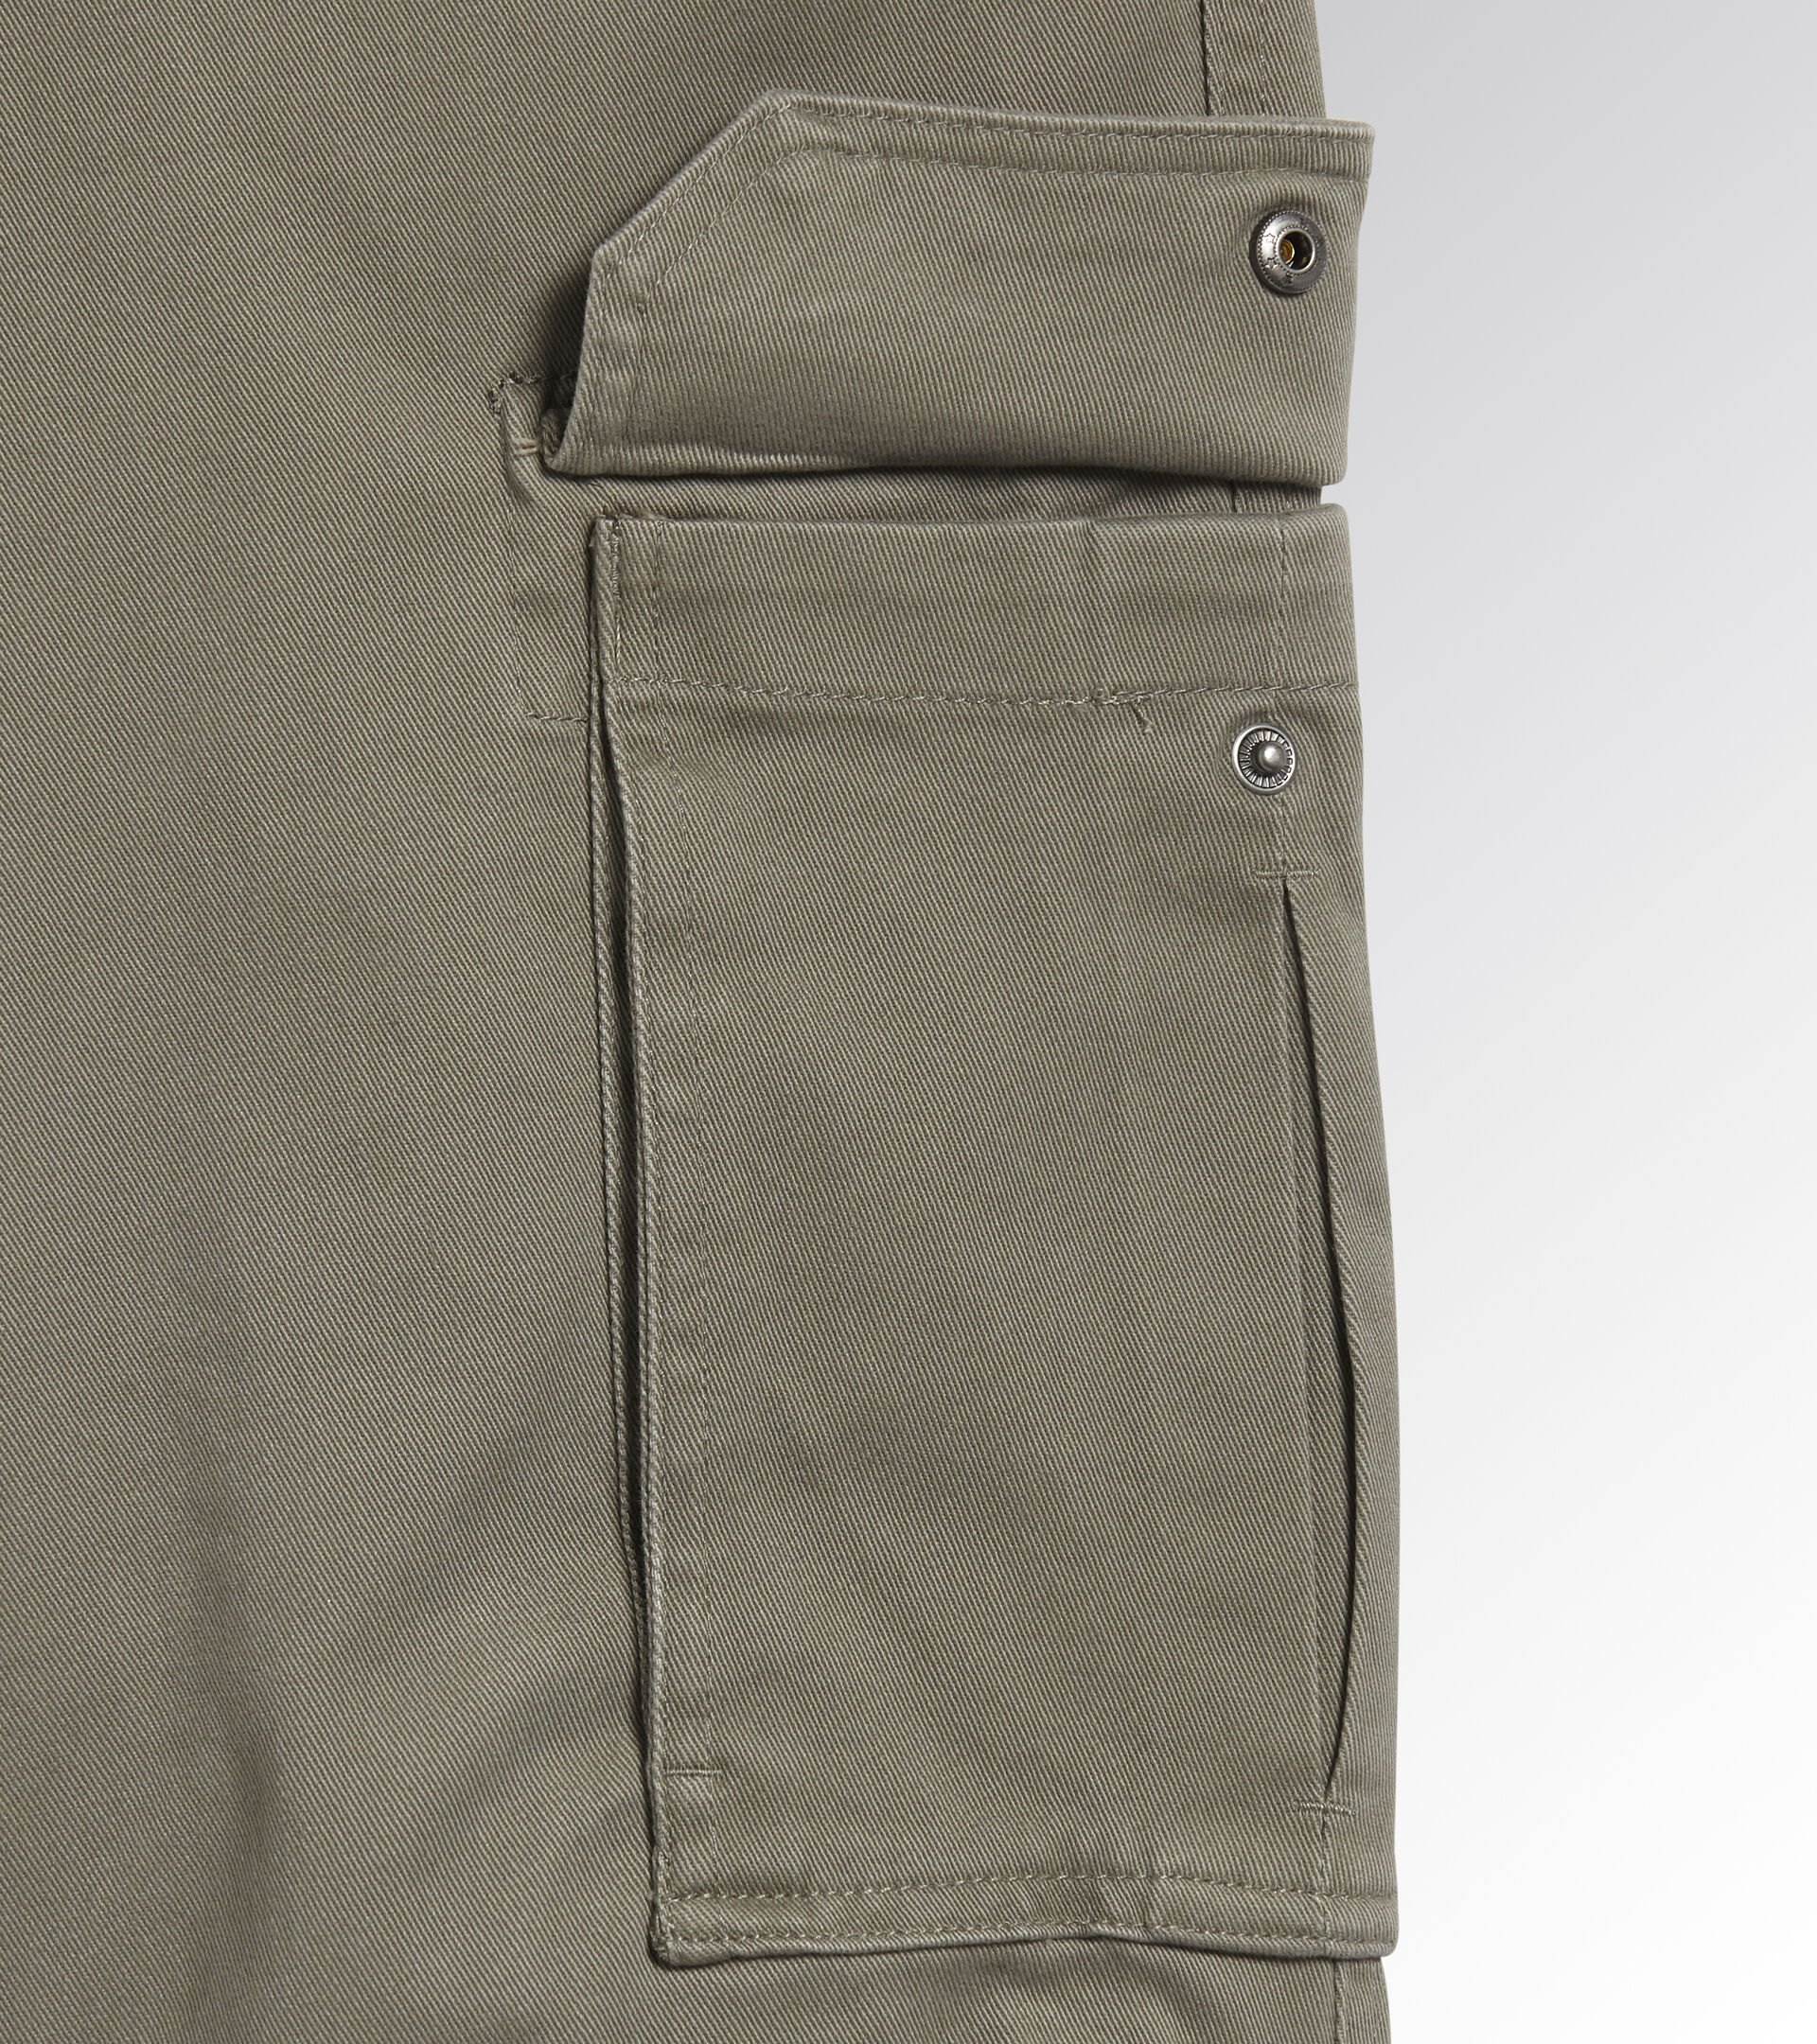 Work trousers CARGO PANT MOSCOW MERMAID - Utility